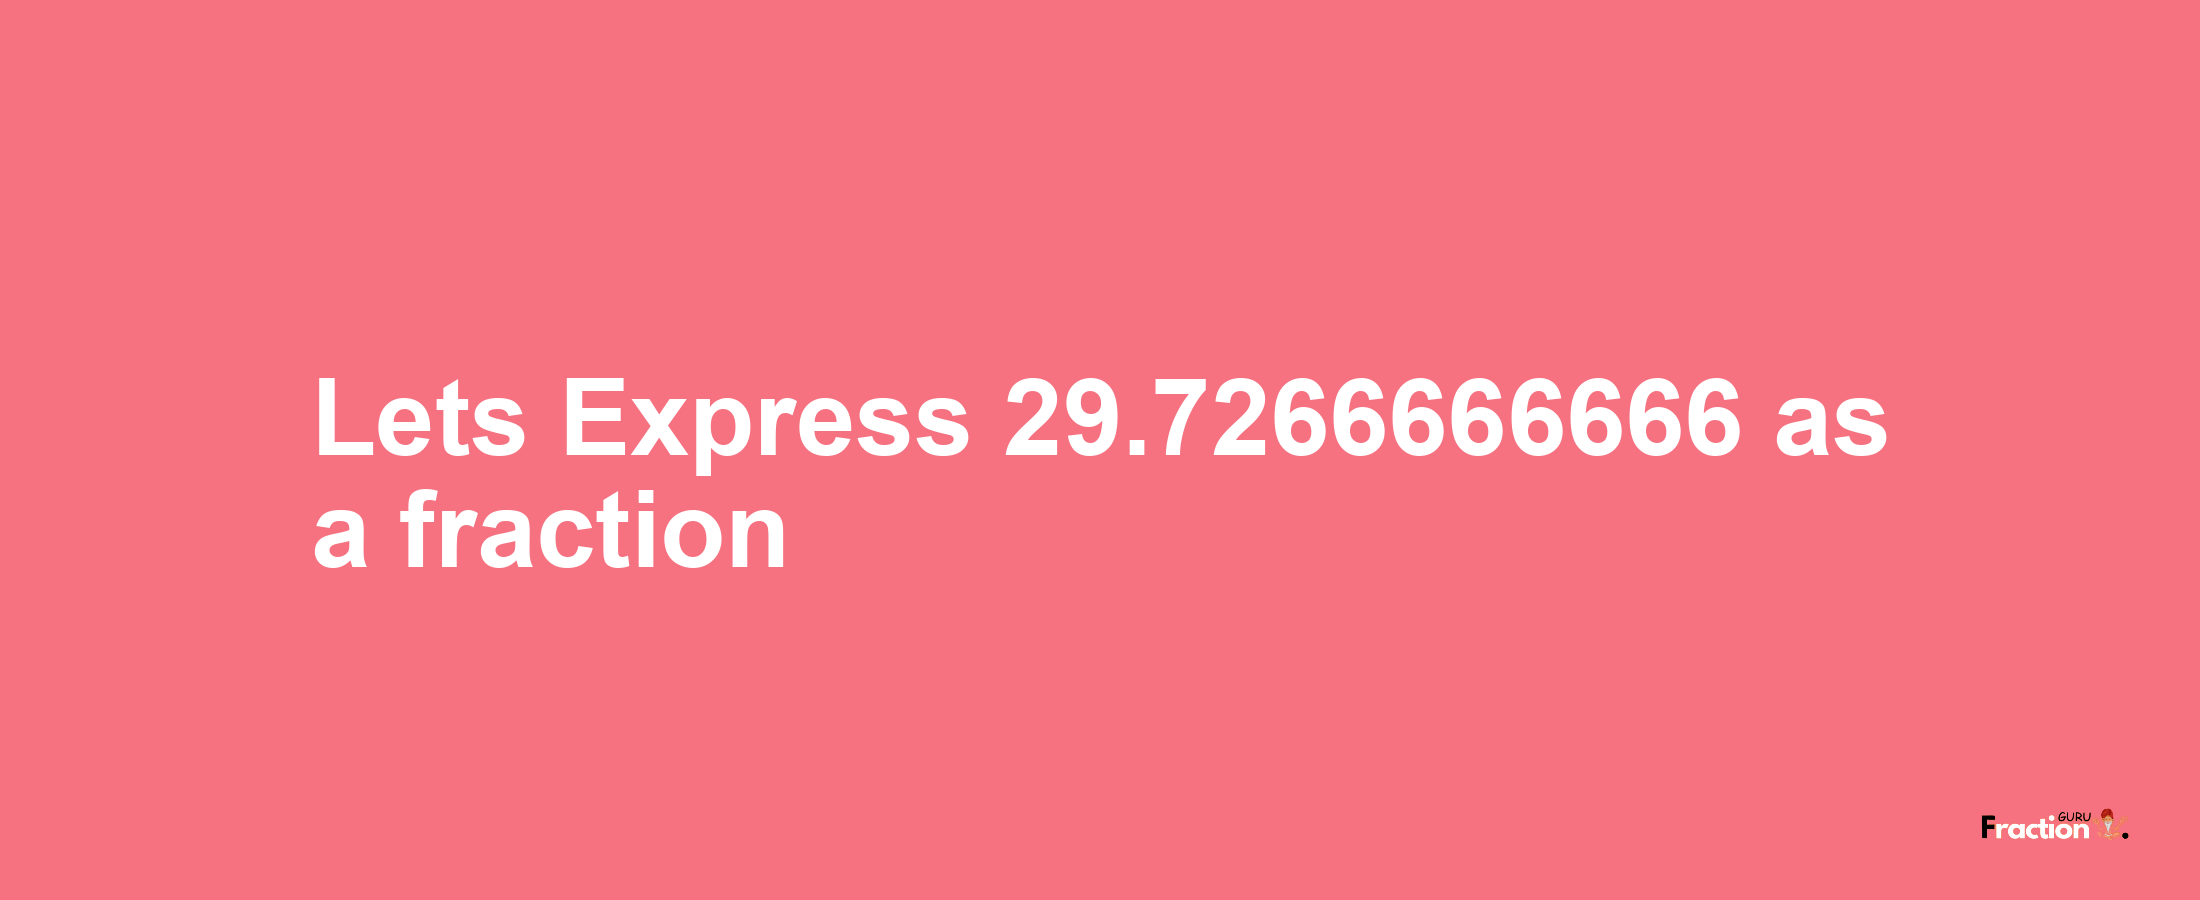 Lets Express 29.7266666666 as afraction